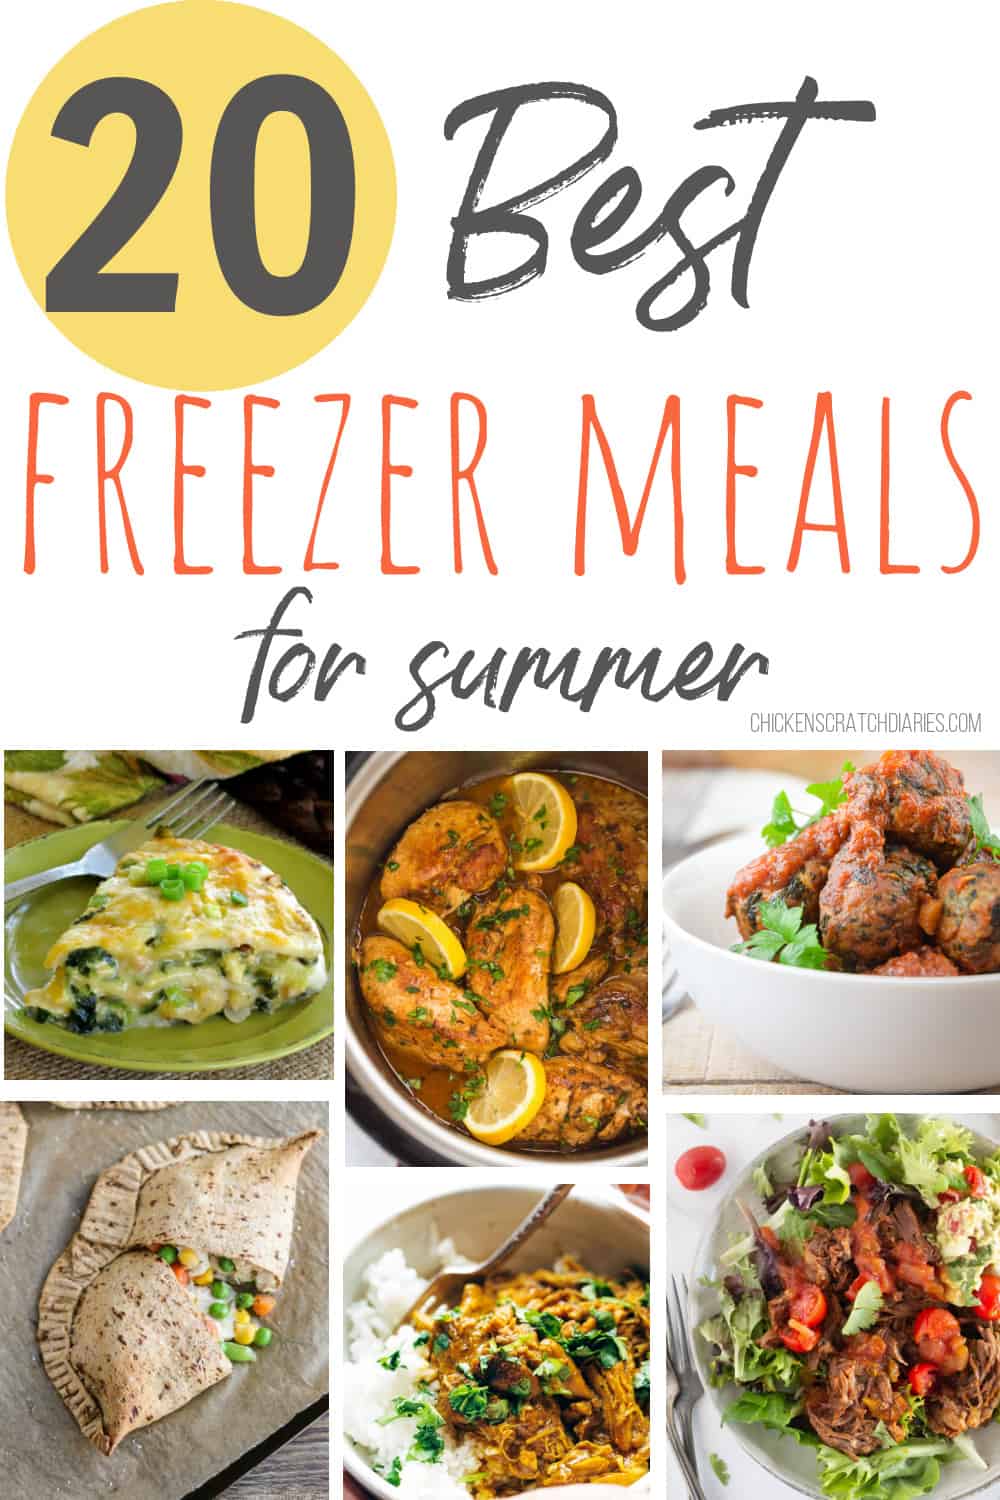 Easy Freezer Meals for Summer (to make ahead for lazy days) » Chicken